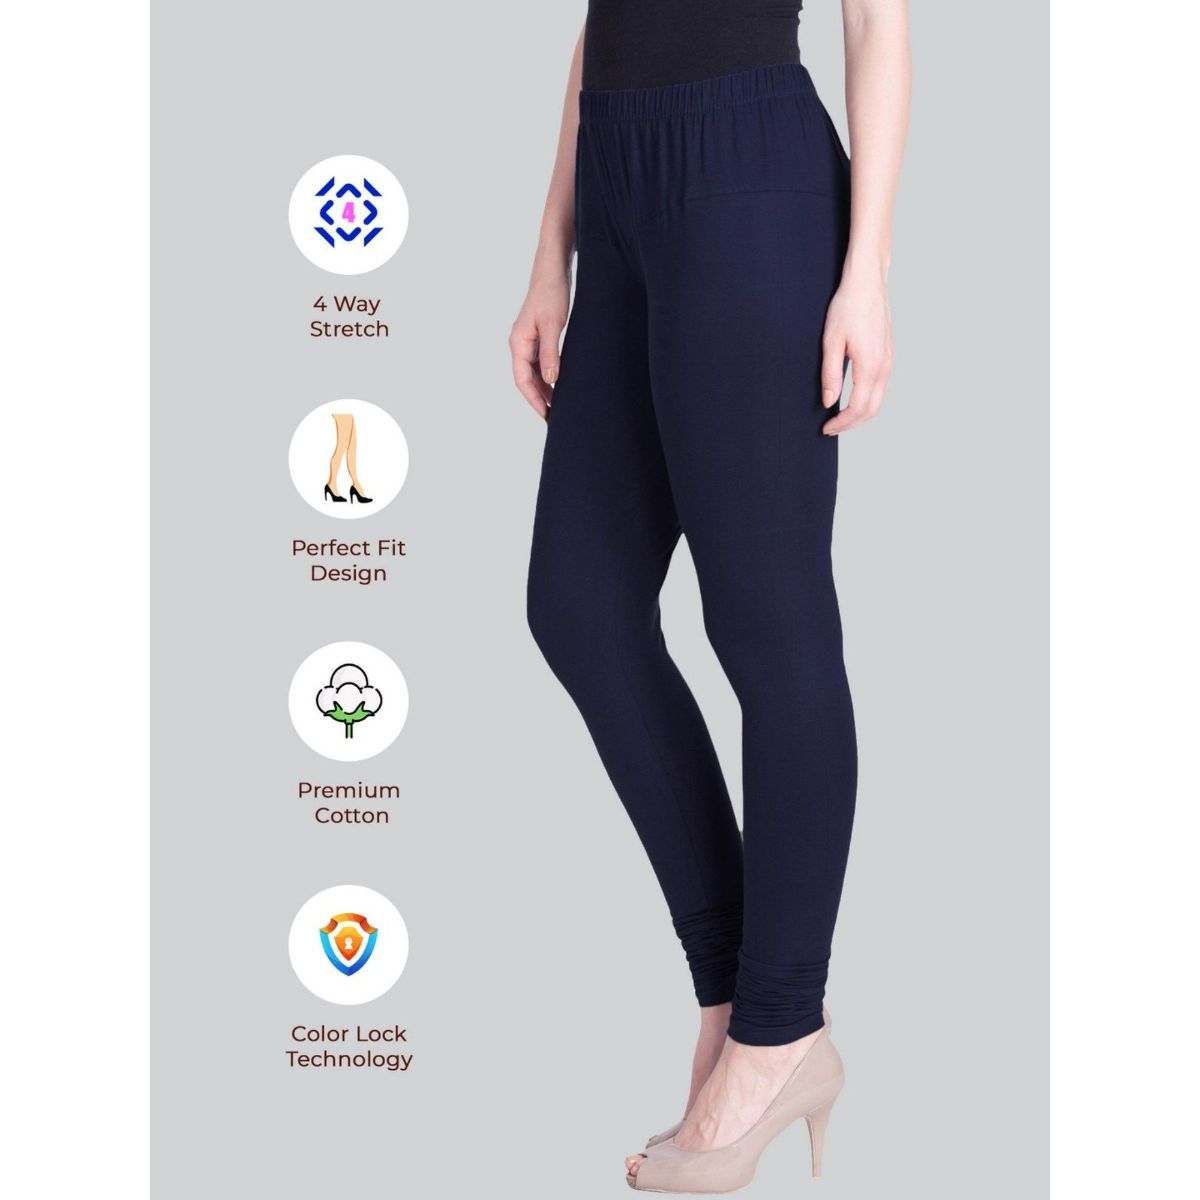 Buy Trendy Girls Combed Pure Cotton Leggings - Navy Blue Color (2XL, Navy  Blue) at Amazon.in